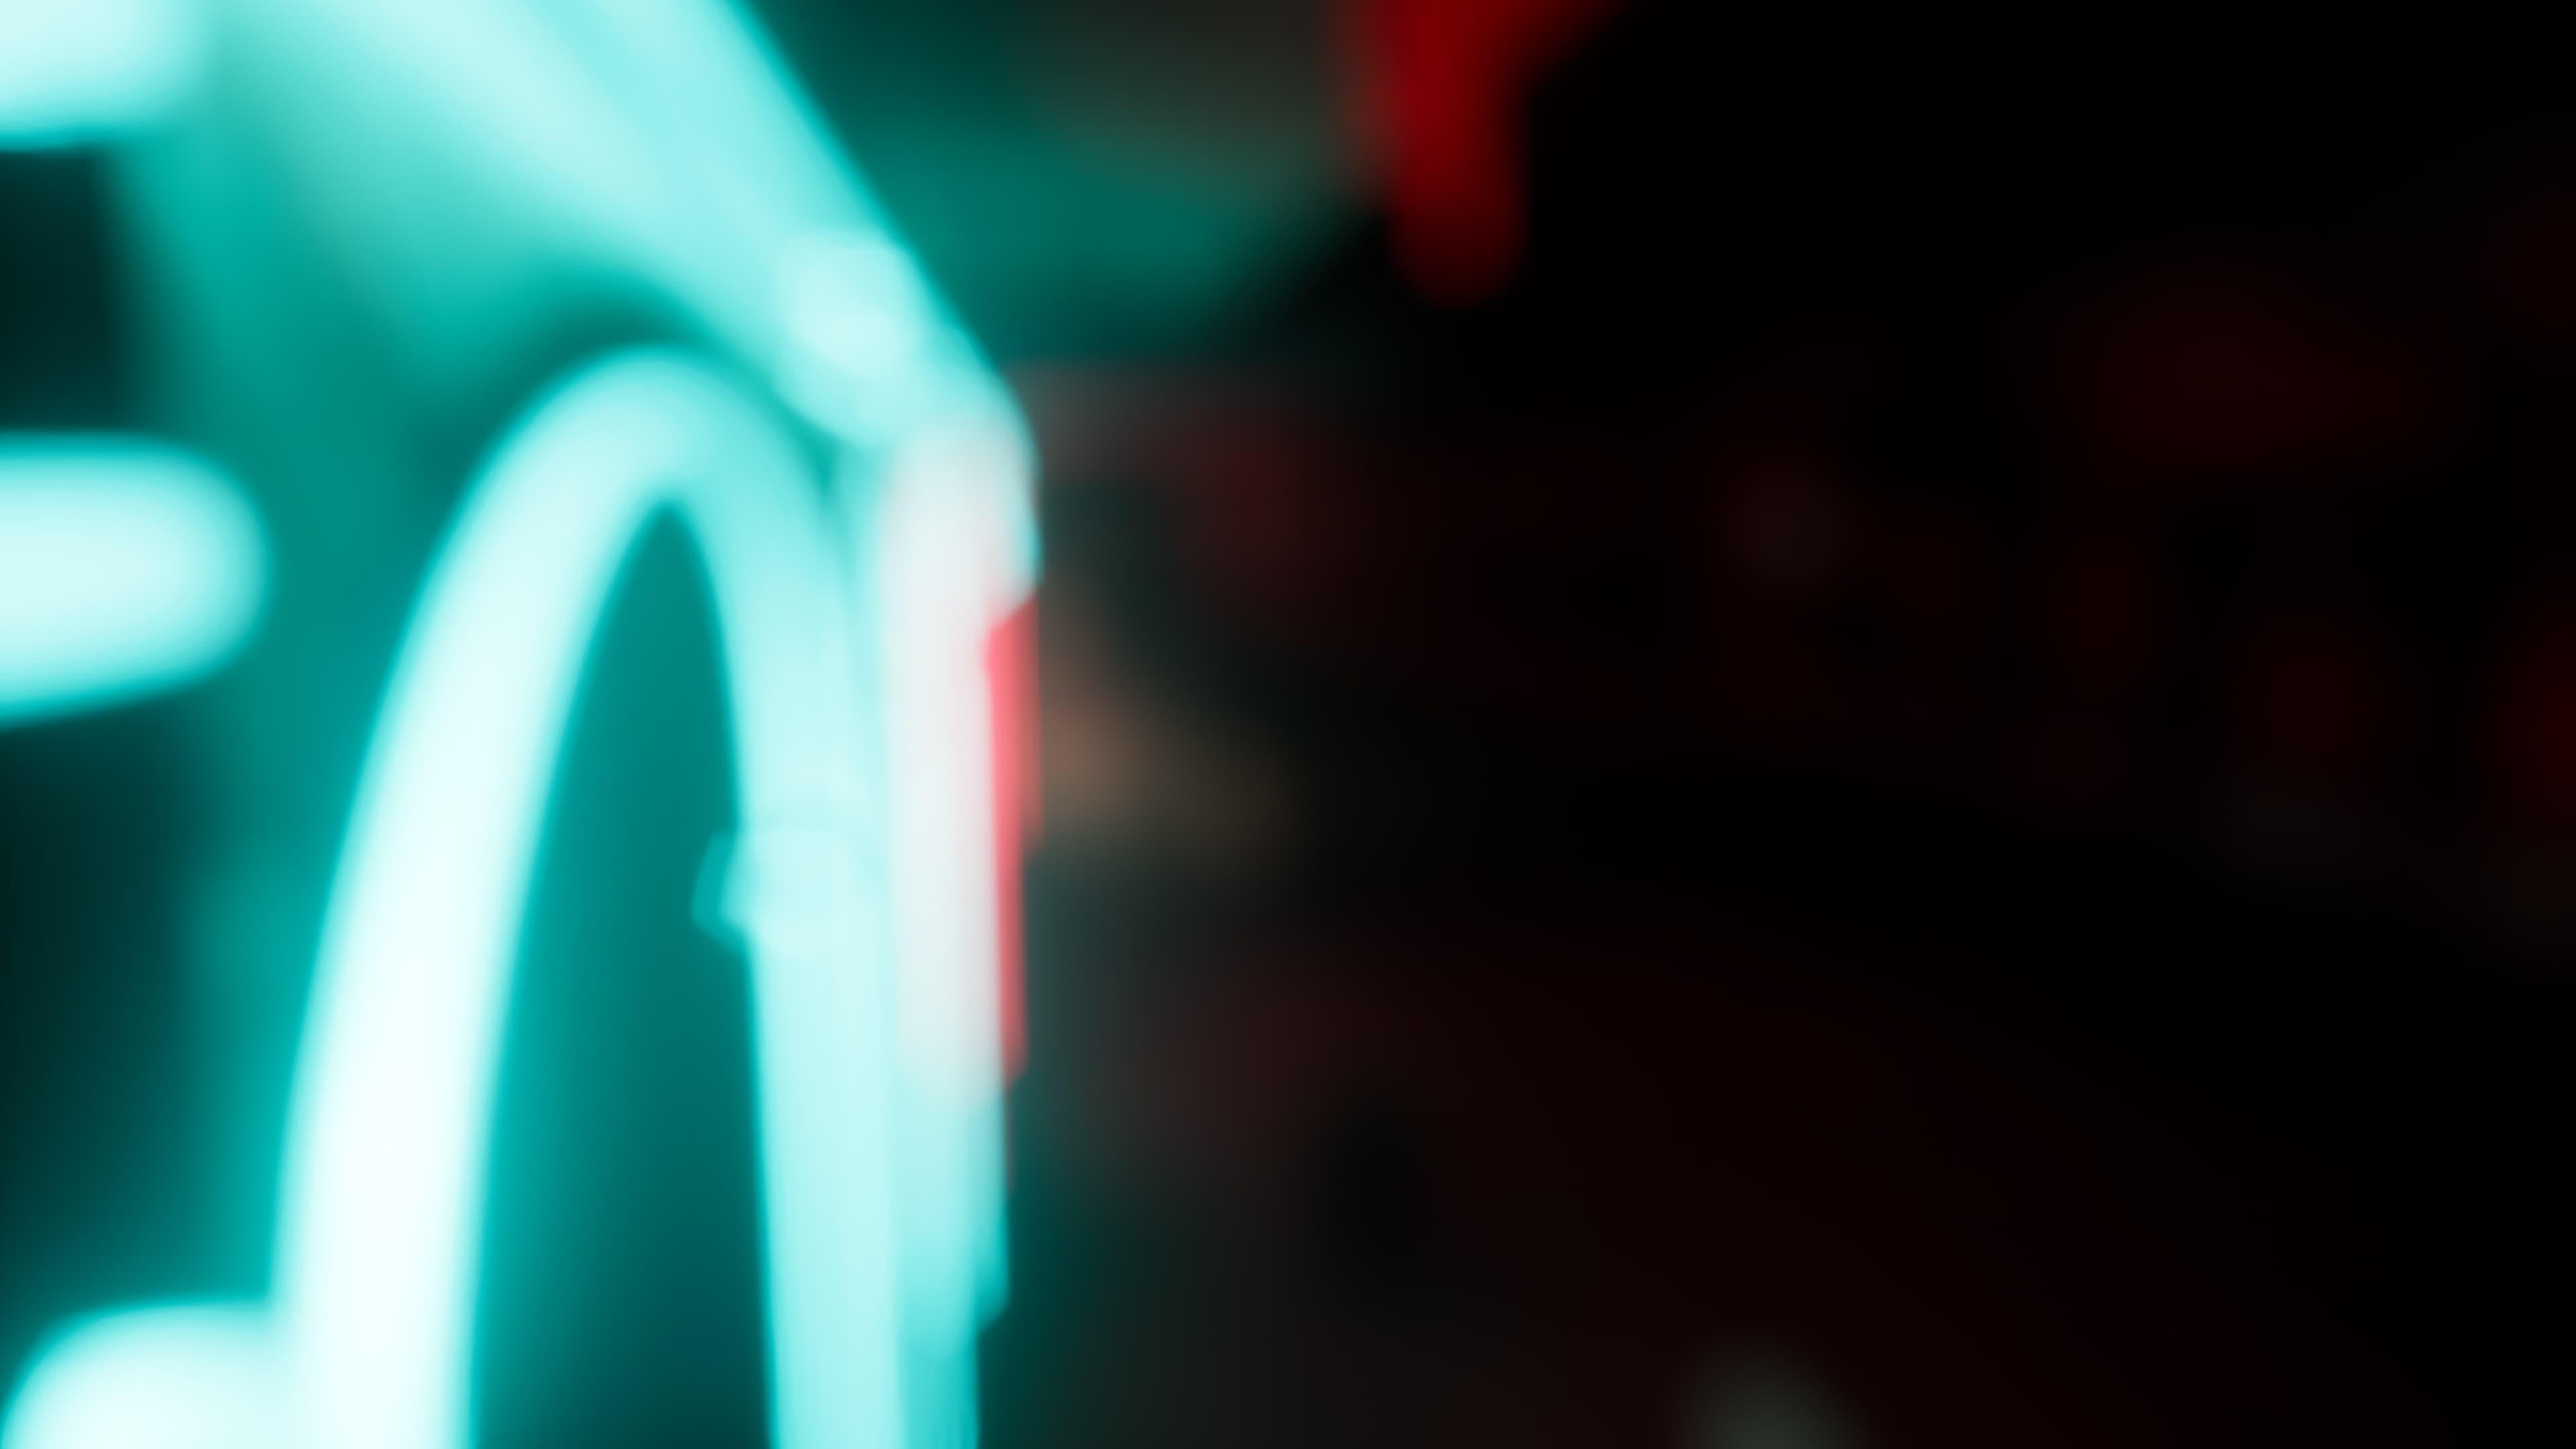 Abstract neon lights, signs and atmosphere in an unknown setting.